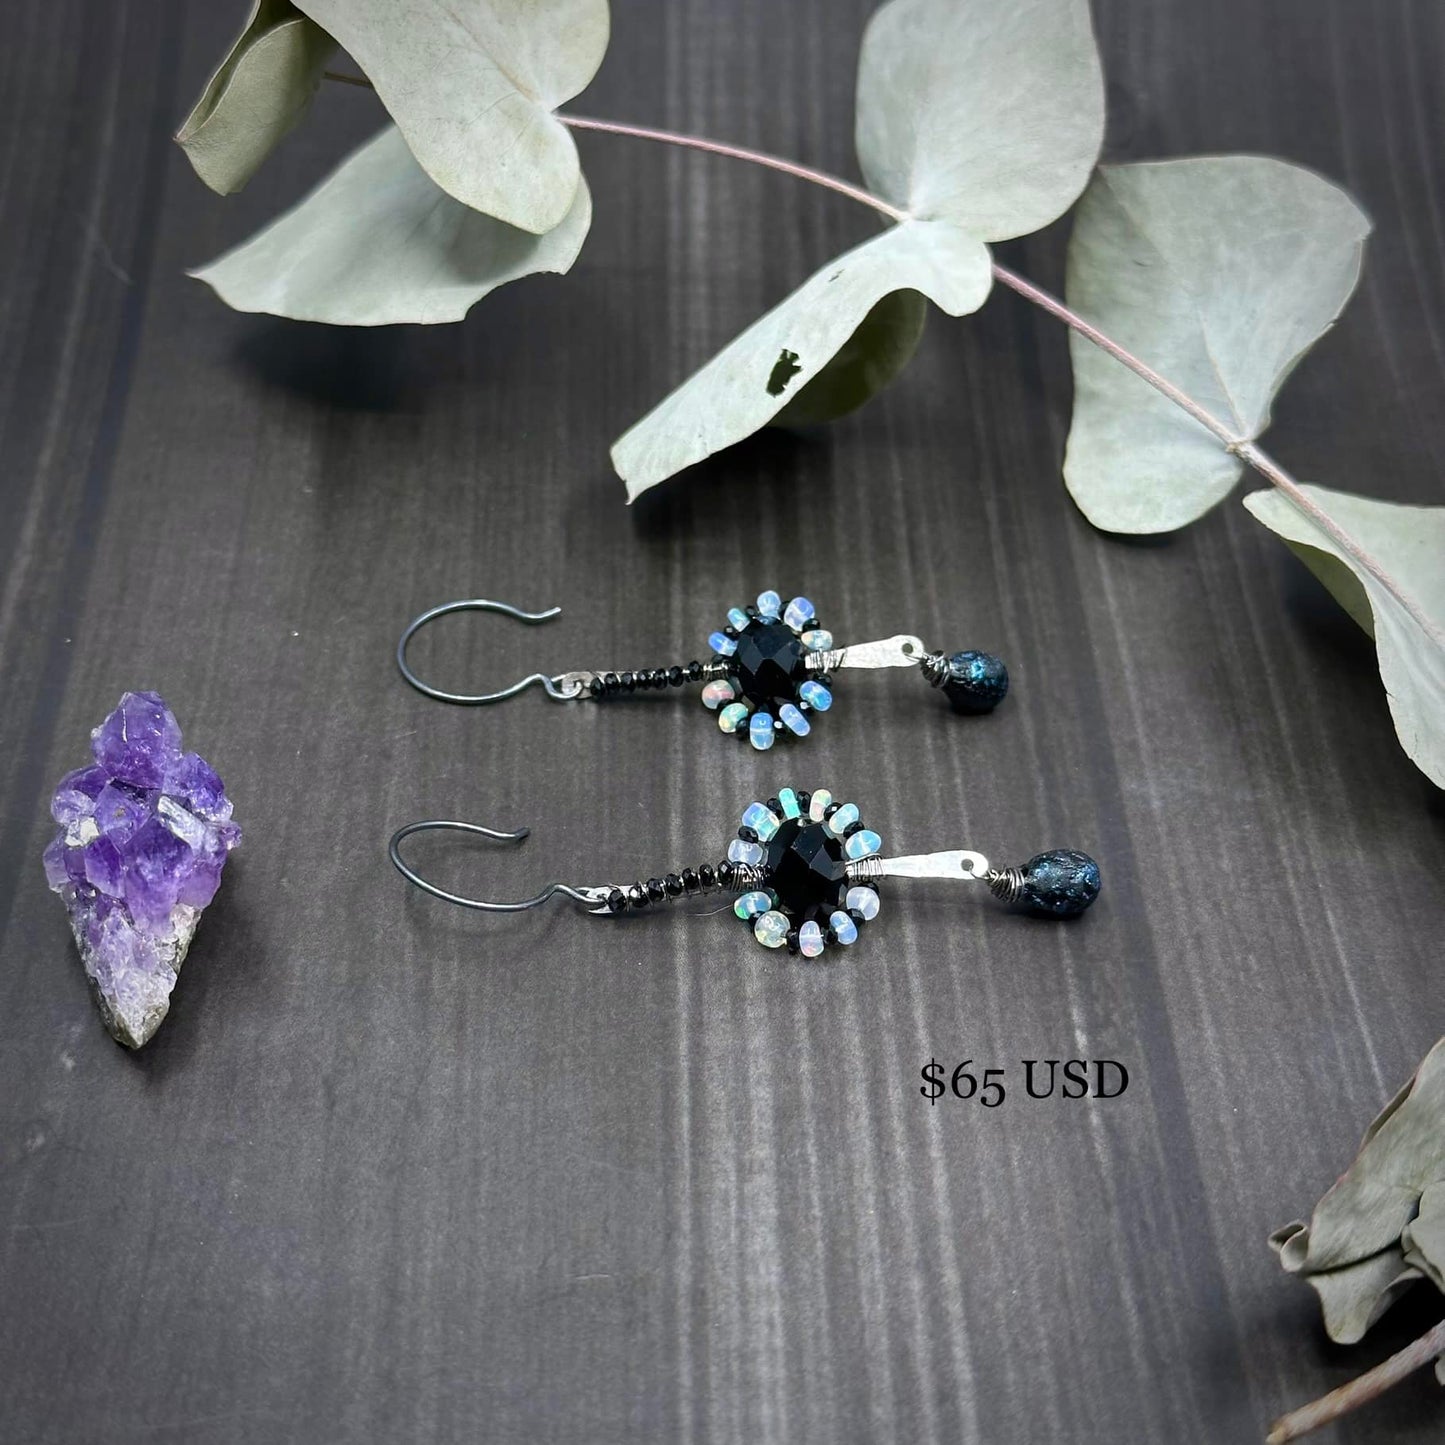 Opal, black spinel, glass, and sterling silver earrings